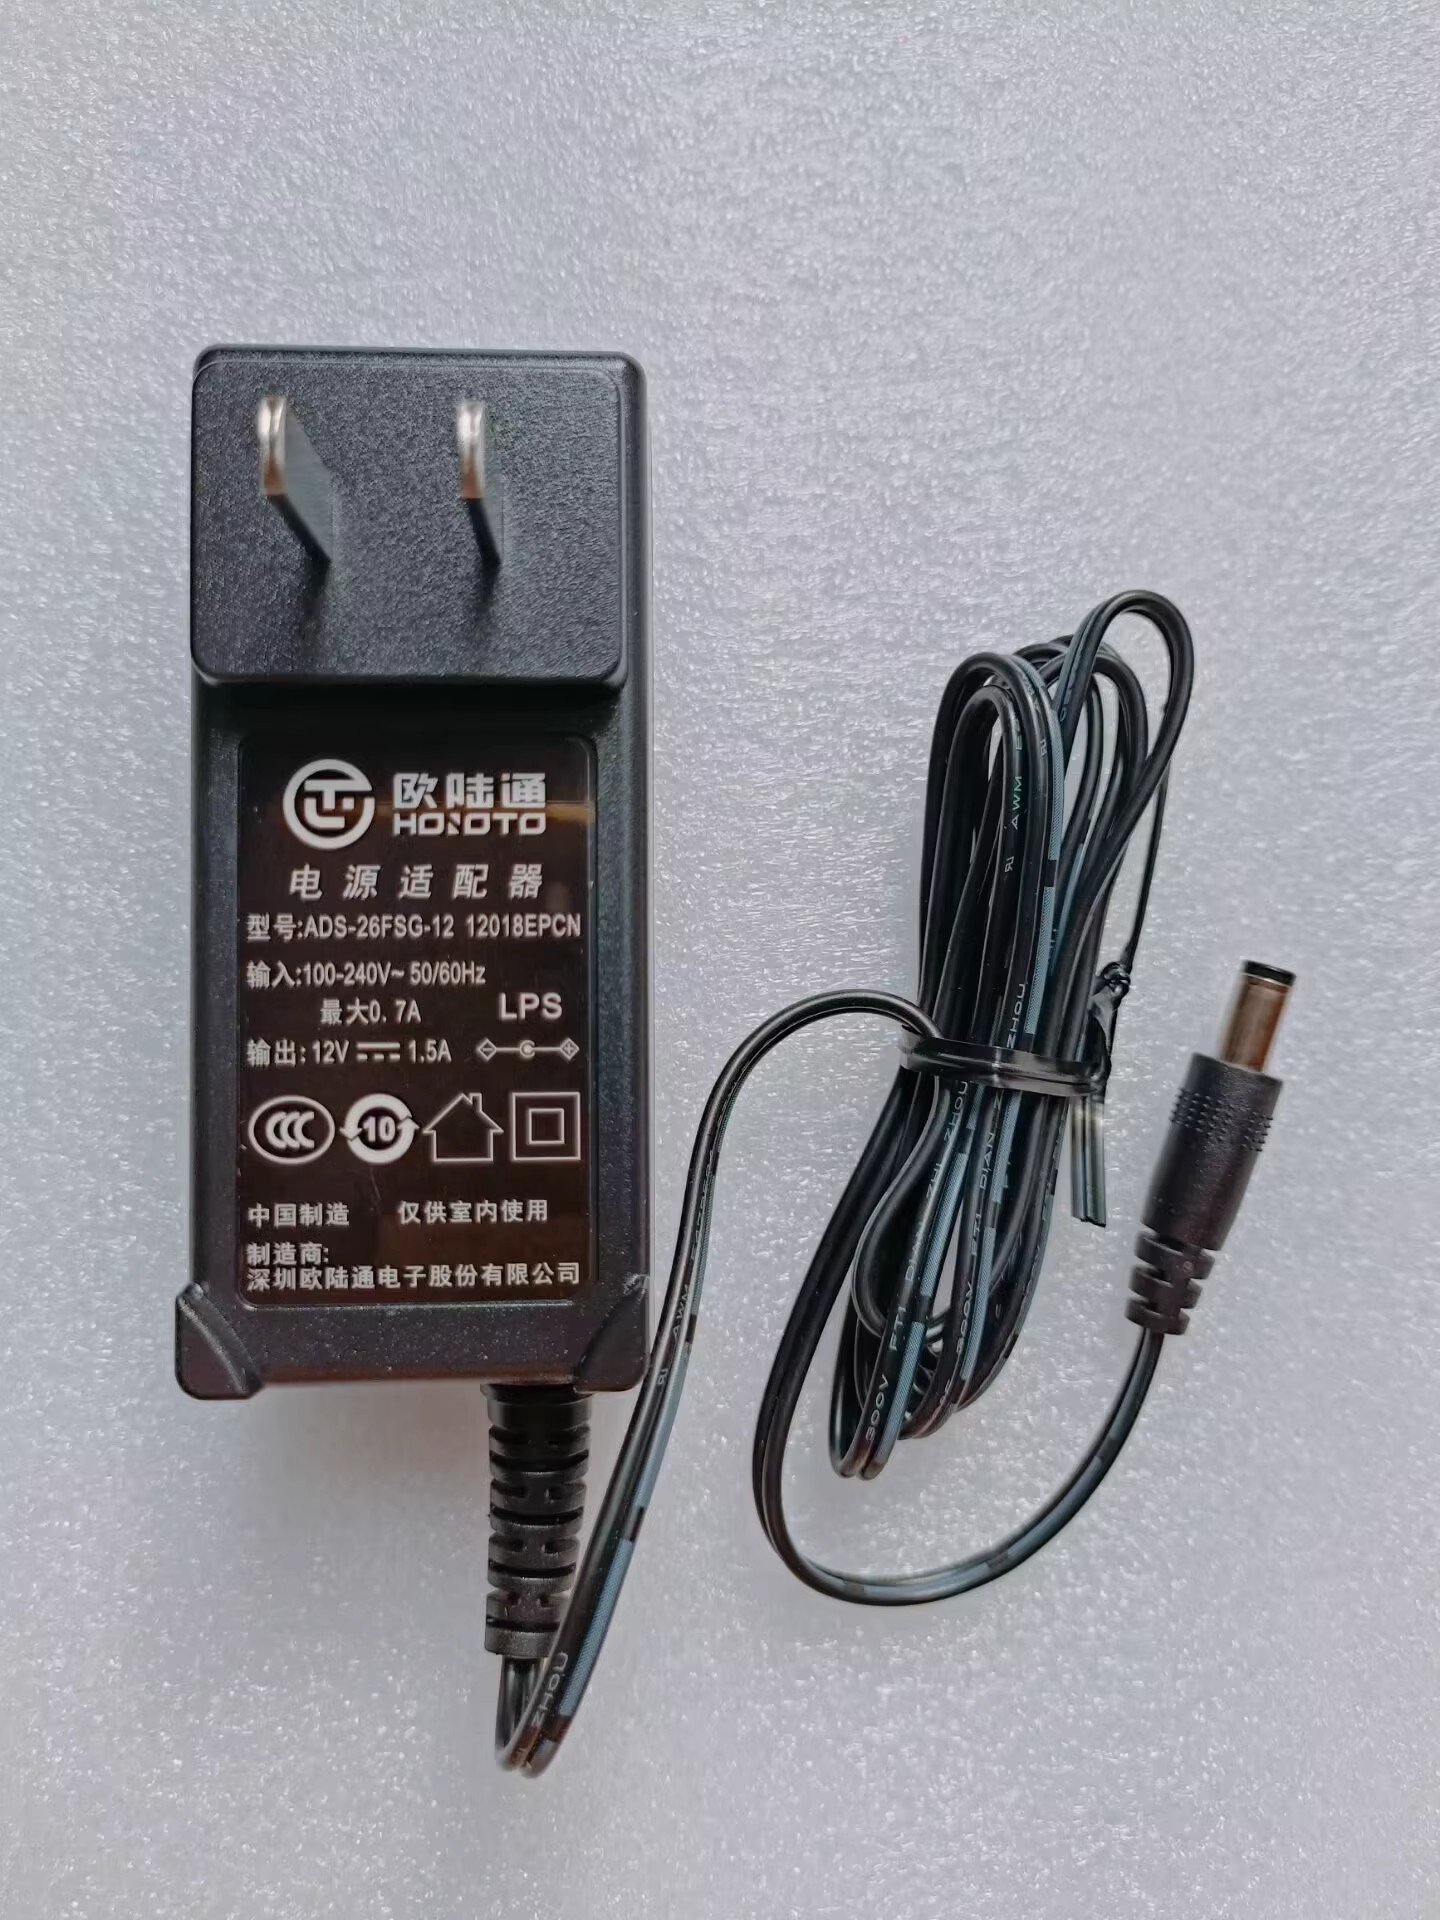 *Brand NEW* 5.5*2.1MM 12V 1.5A AC DC ADAPTHE KW300-120L15 POWER Supply